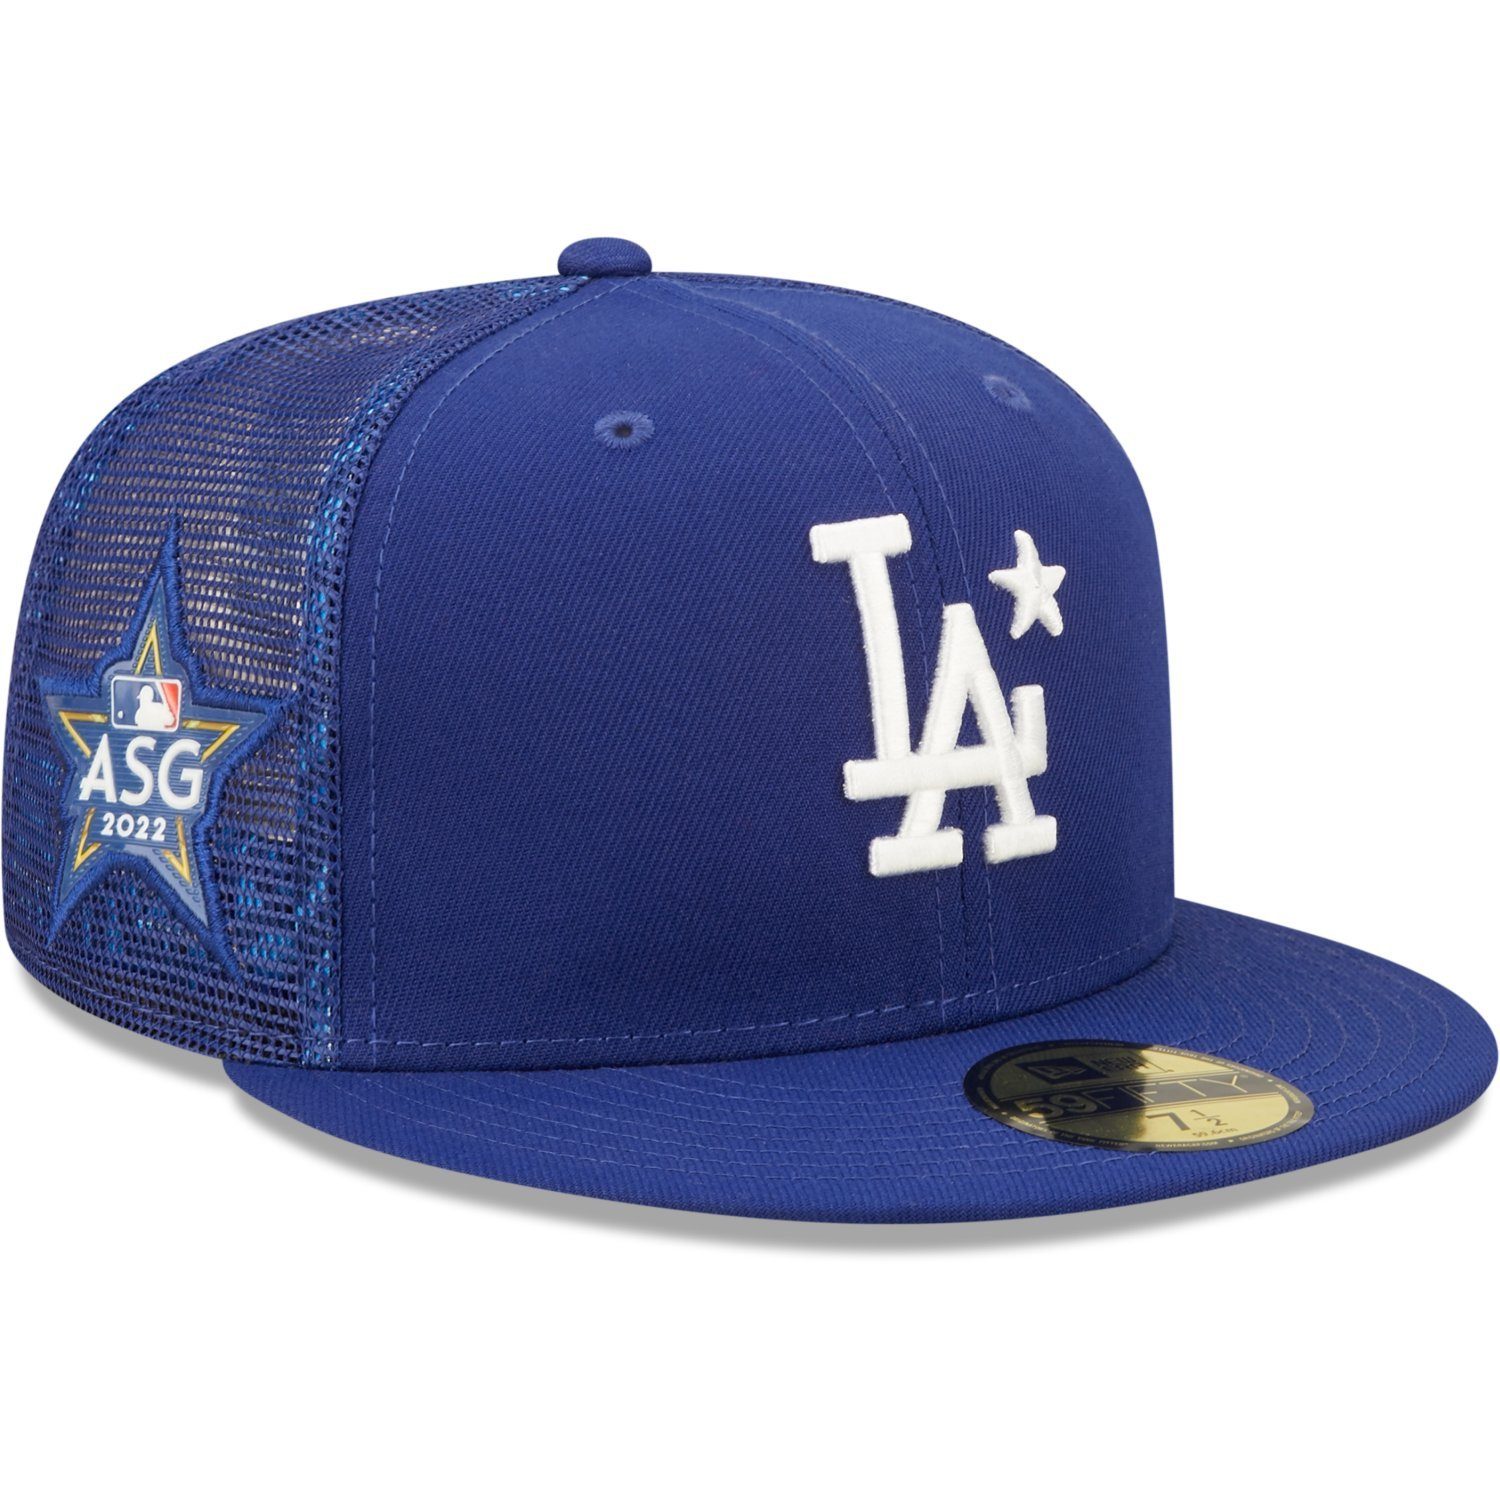 New Era Fitted Cap 59Fifty ALLSTAR GAME Los Angeles Dodgers